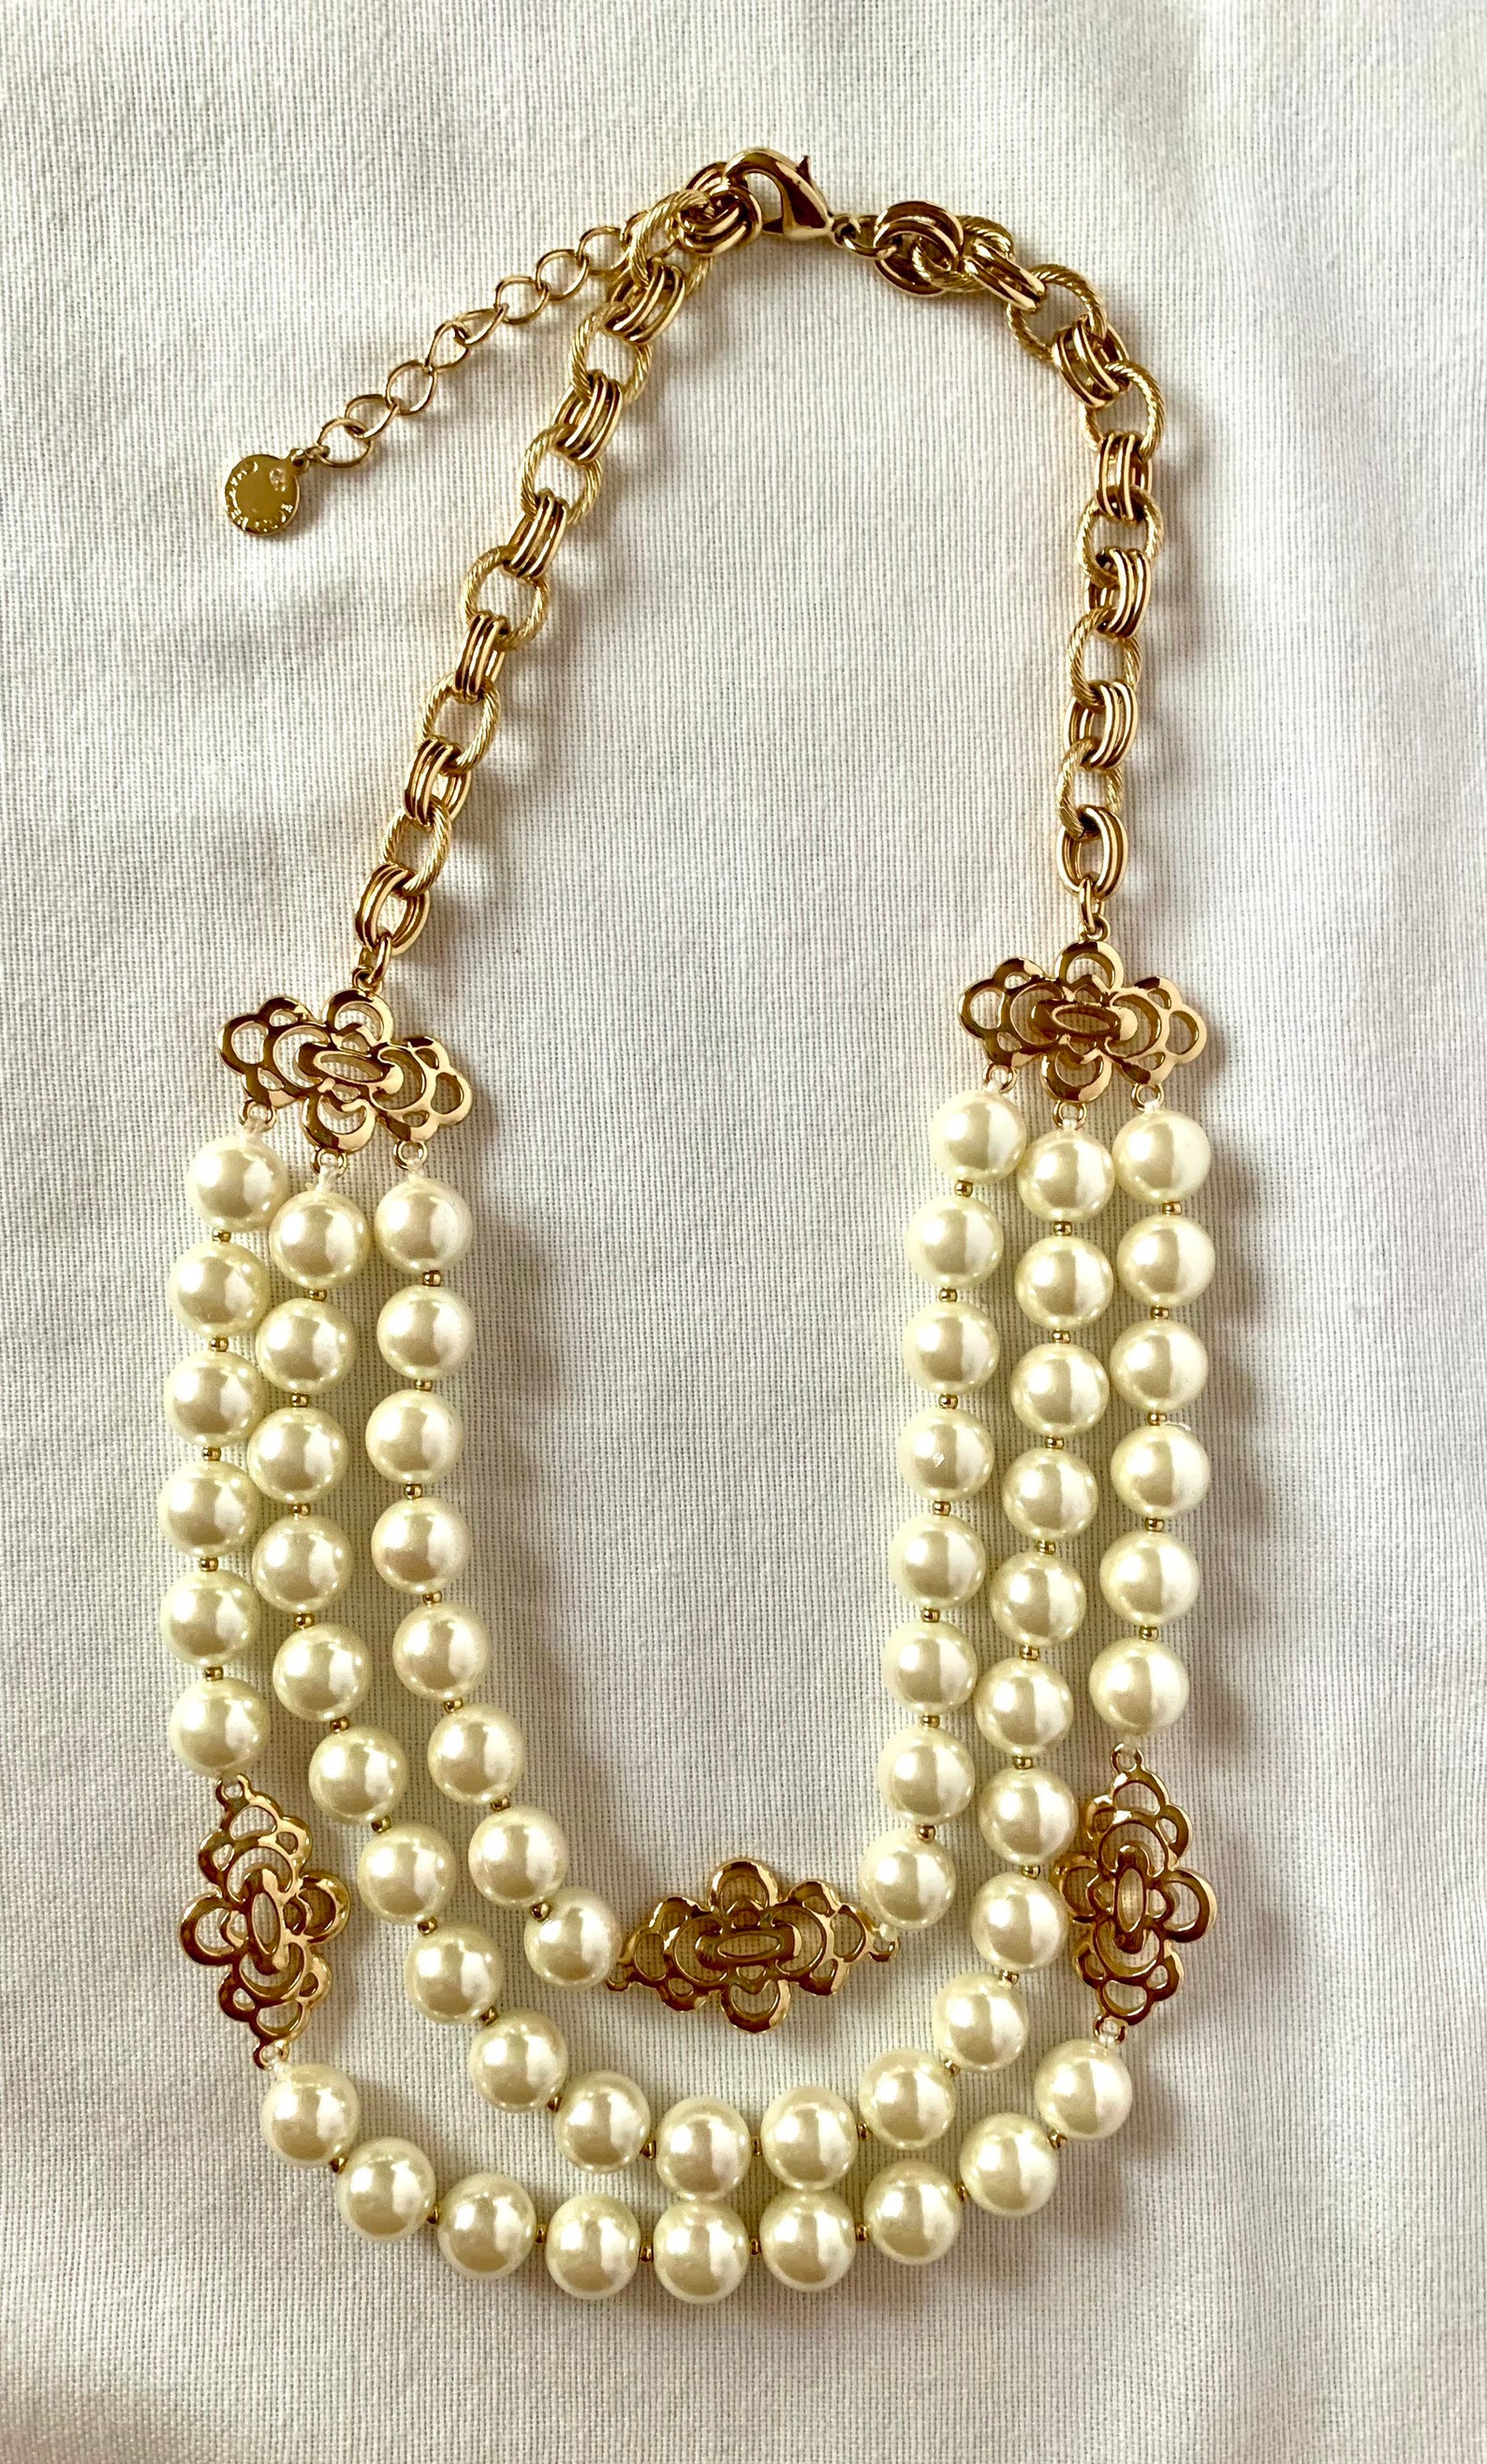 Charter Club Multi-strand Pearl Necklace - Etsy